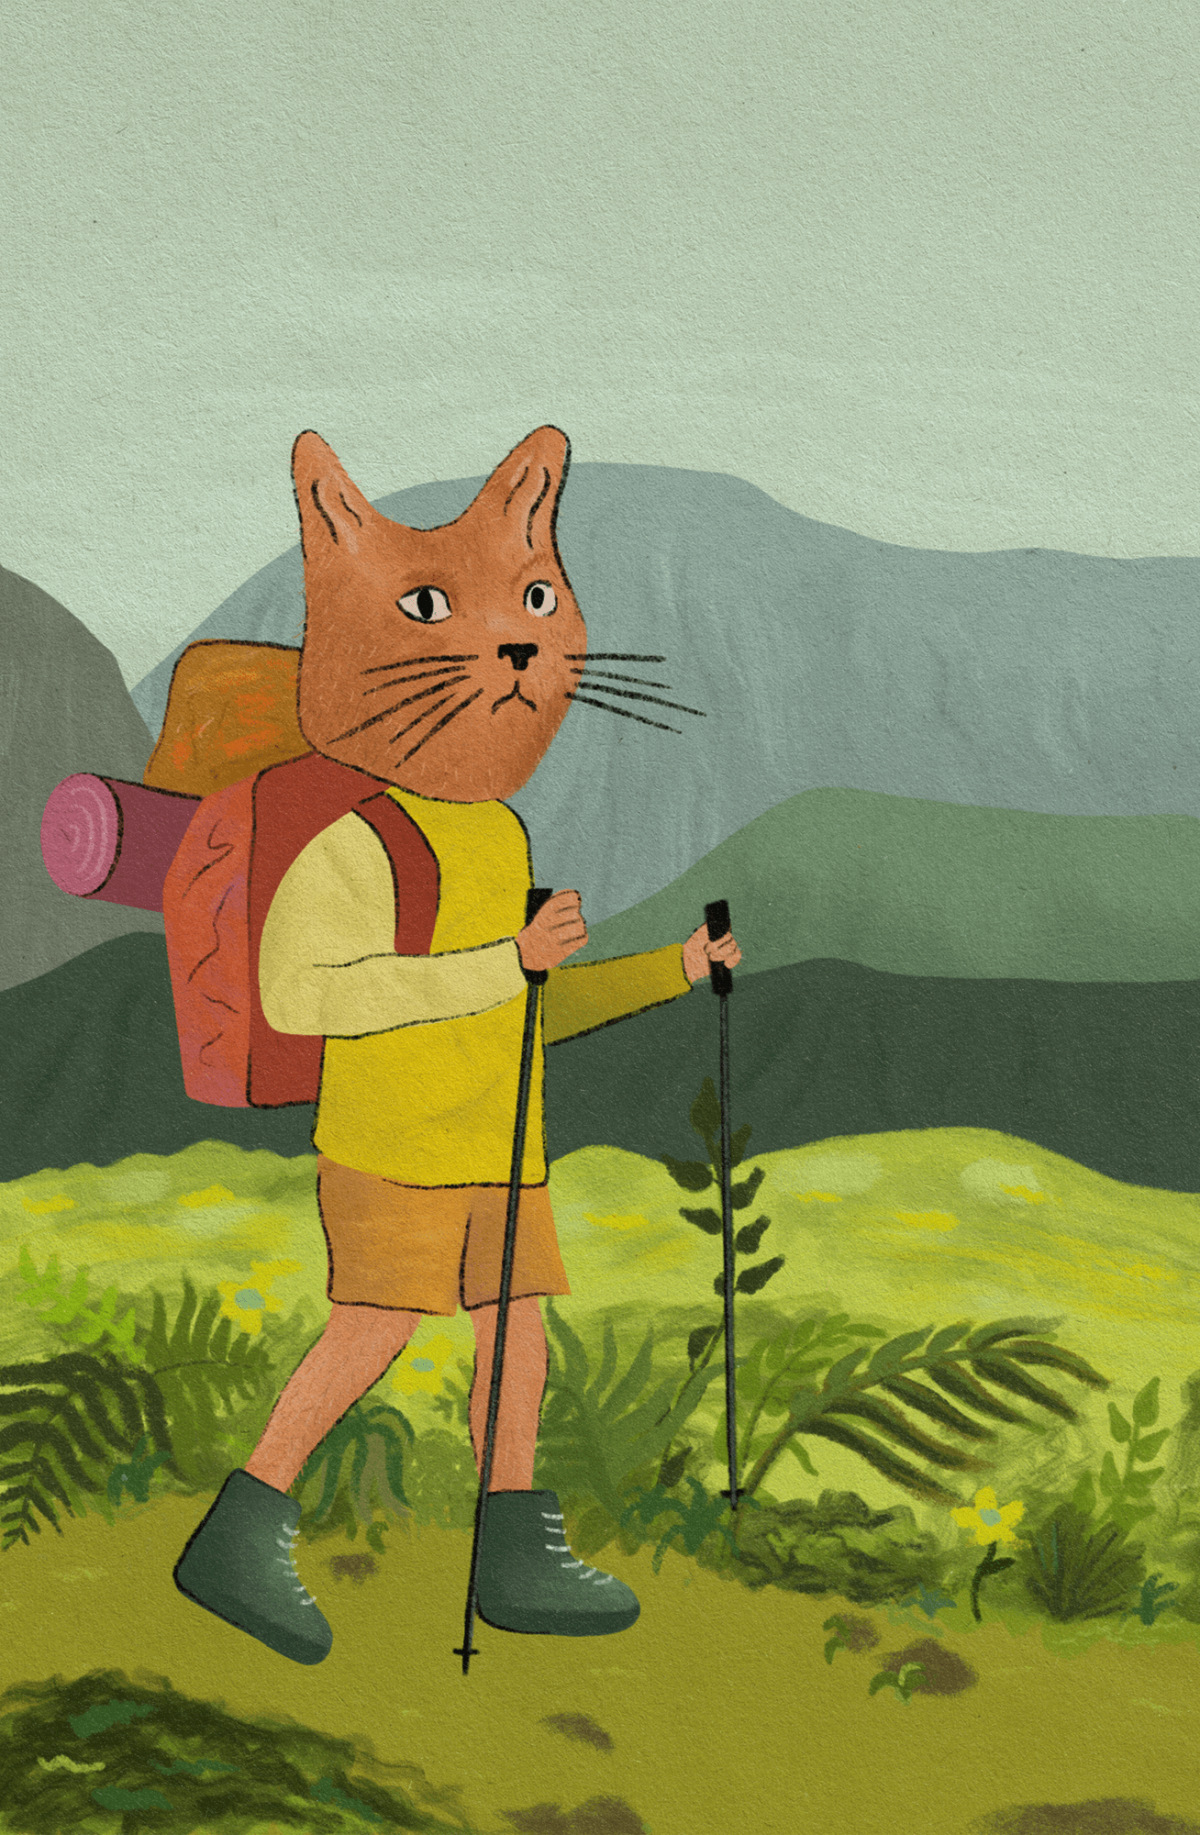 An illustration of a cat with a backpack and hiking polls in front of a mountainscape